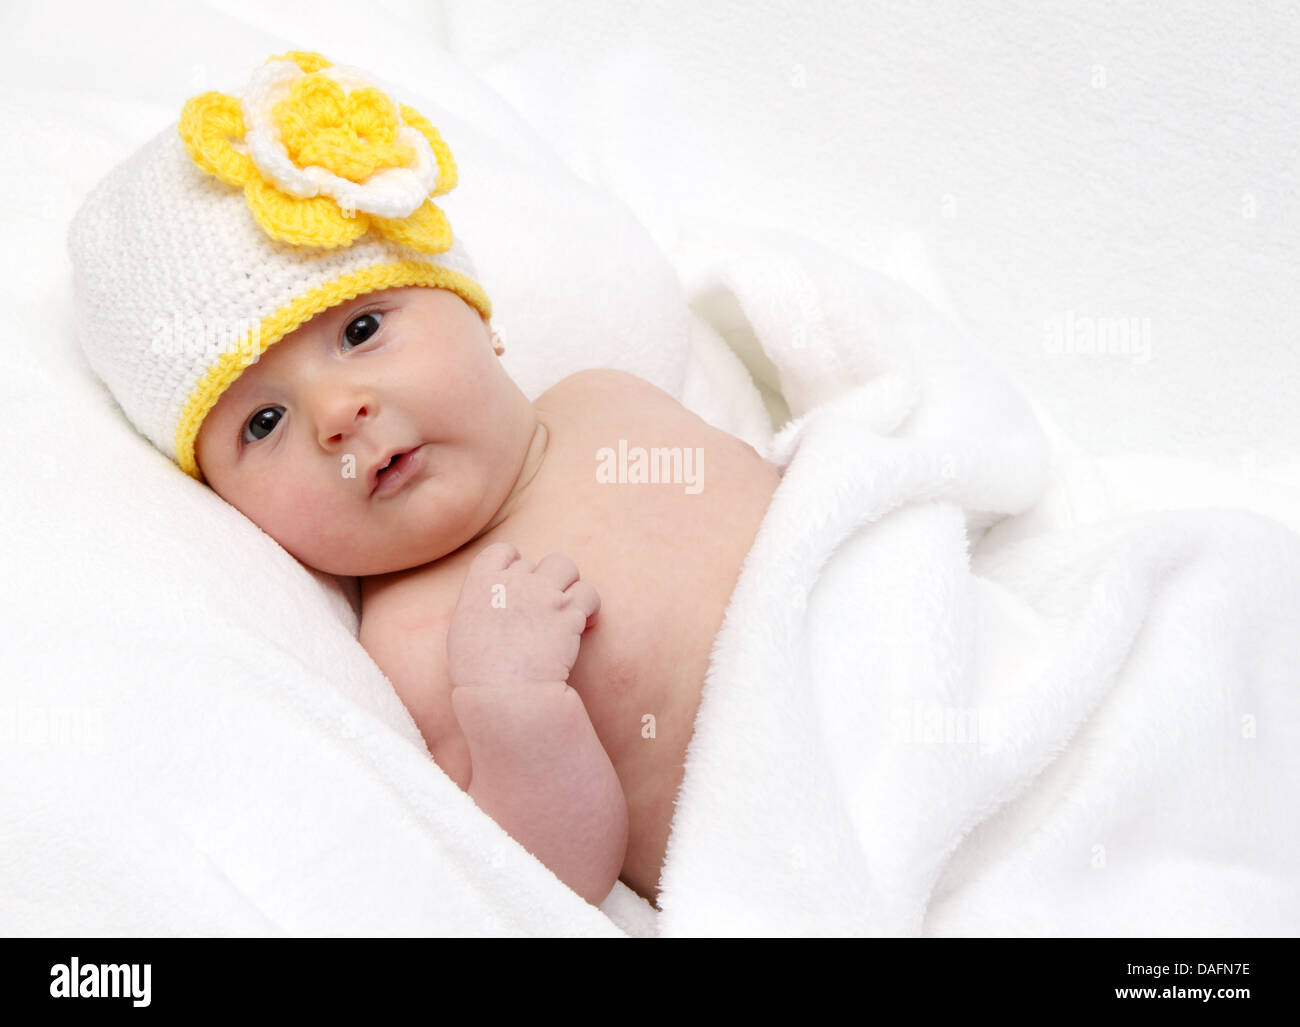 Baby with a knitted white hat baby on back Stock Photo